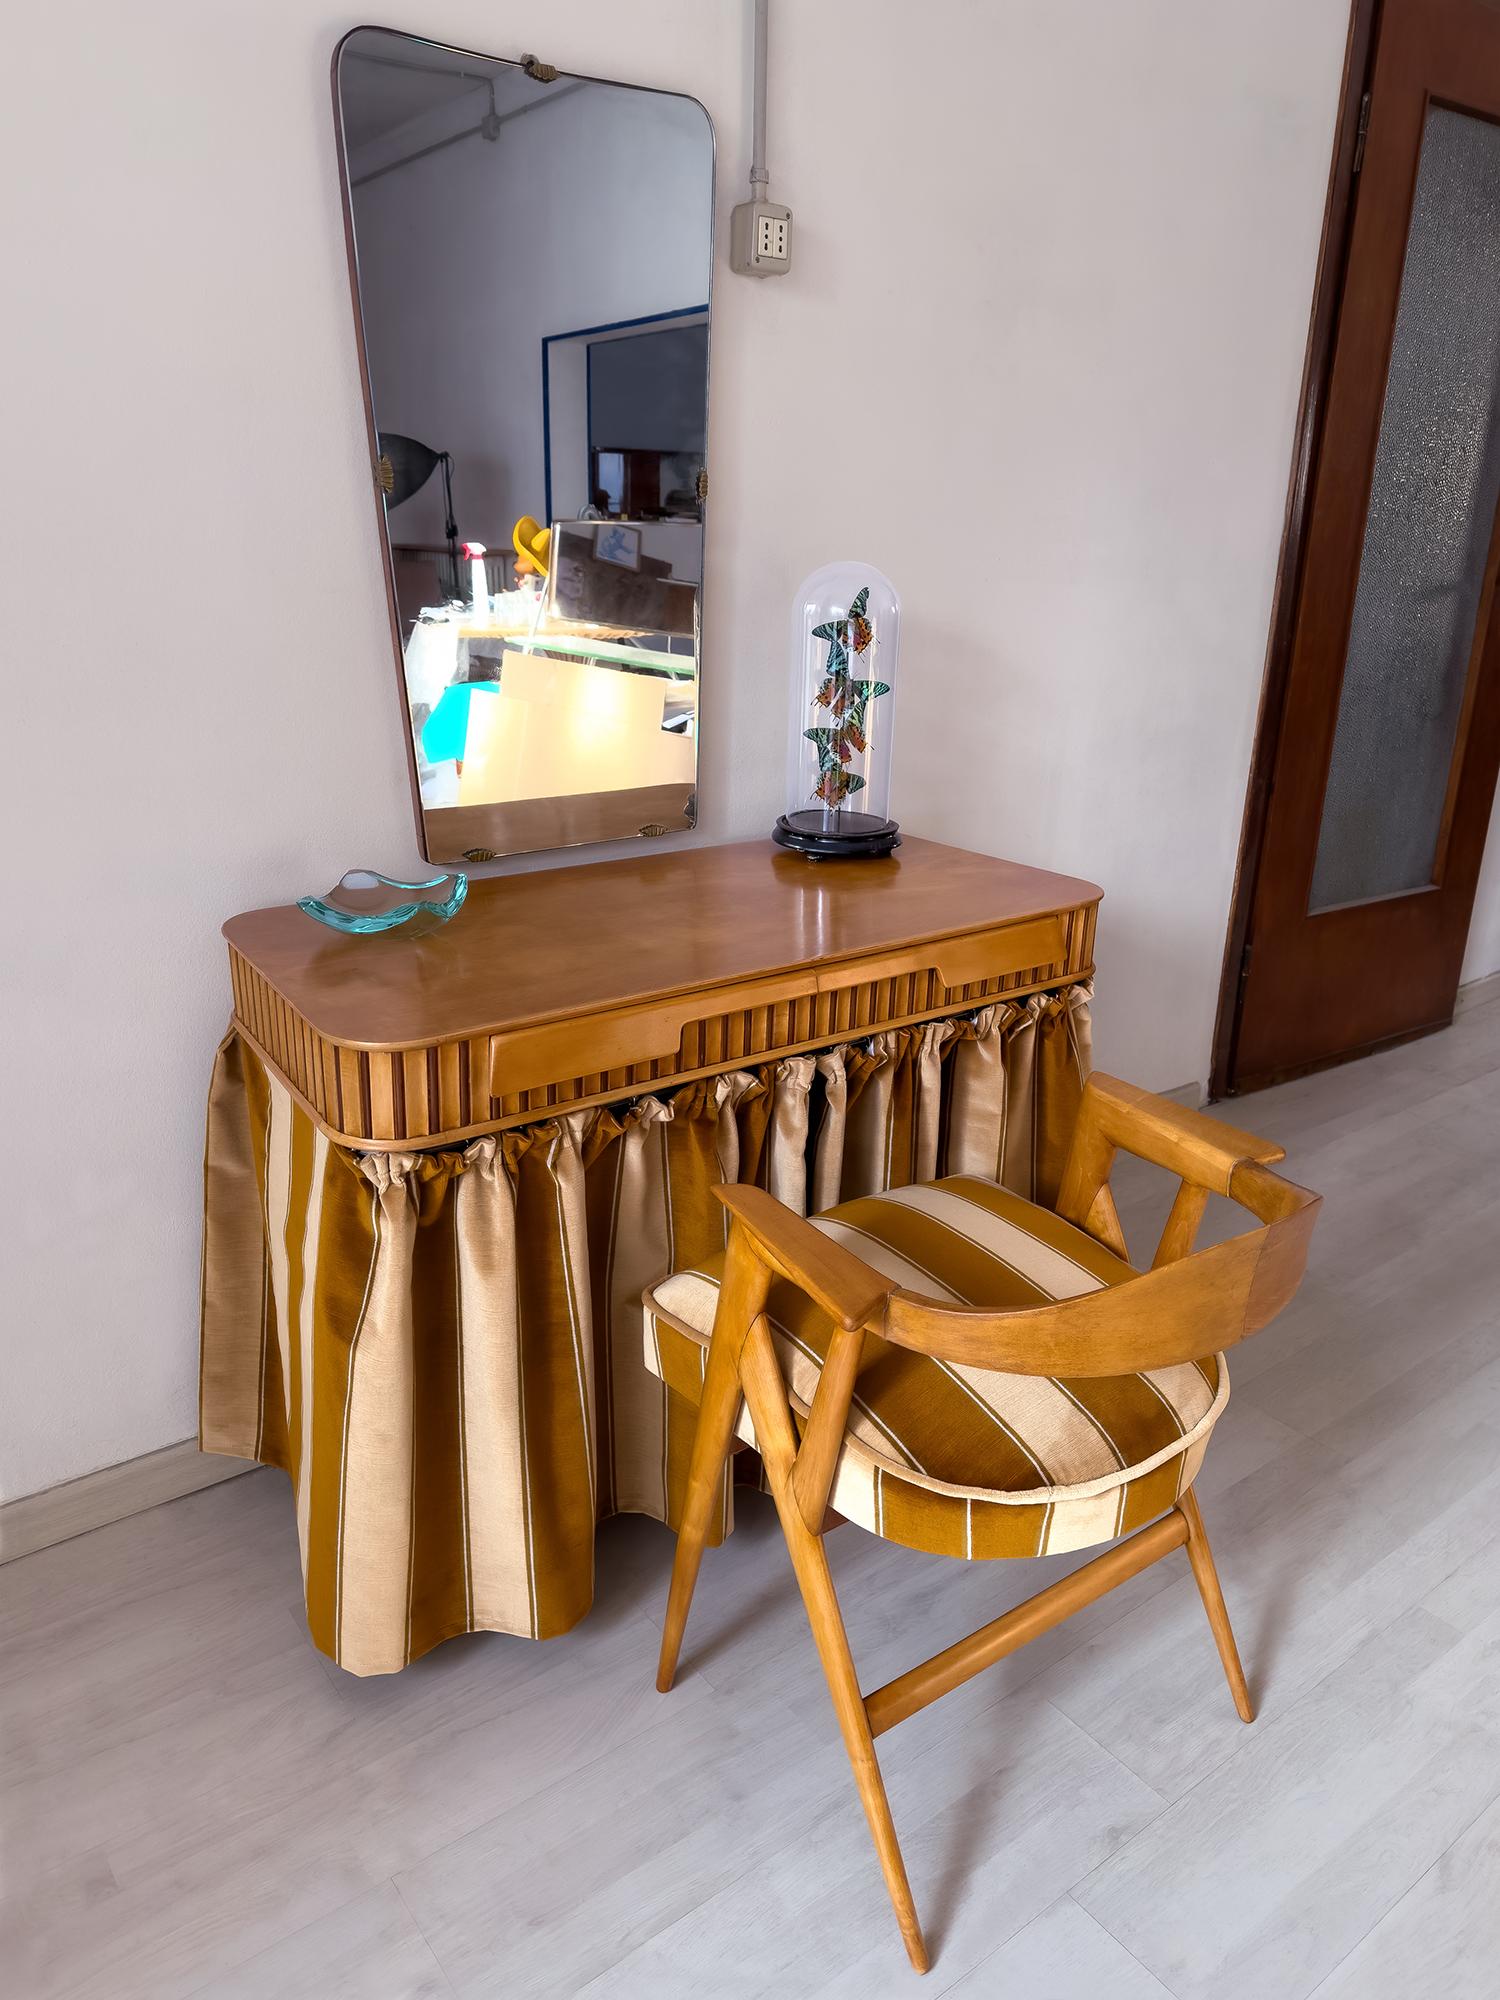 Stunning and very rare Italian small Vanity Table of the 1950s, equipped with mirror and armchair, a real unique piece designed by Vittorio Dassi most likely four-handed together Gio Ponti, with whom he worked for many years.

It's an amazing and